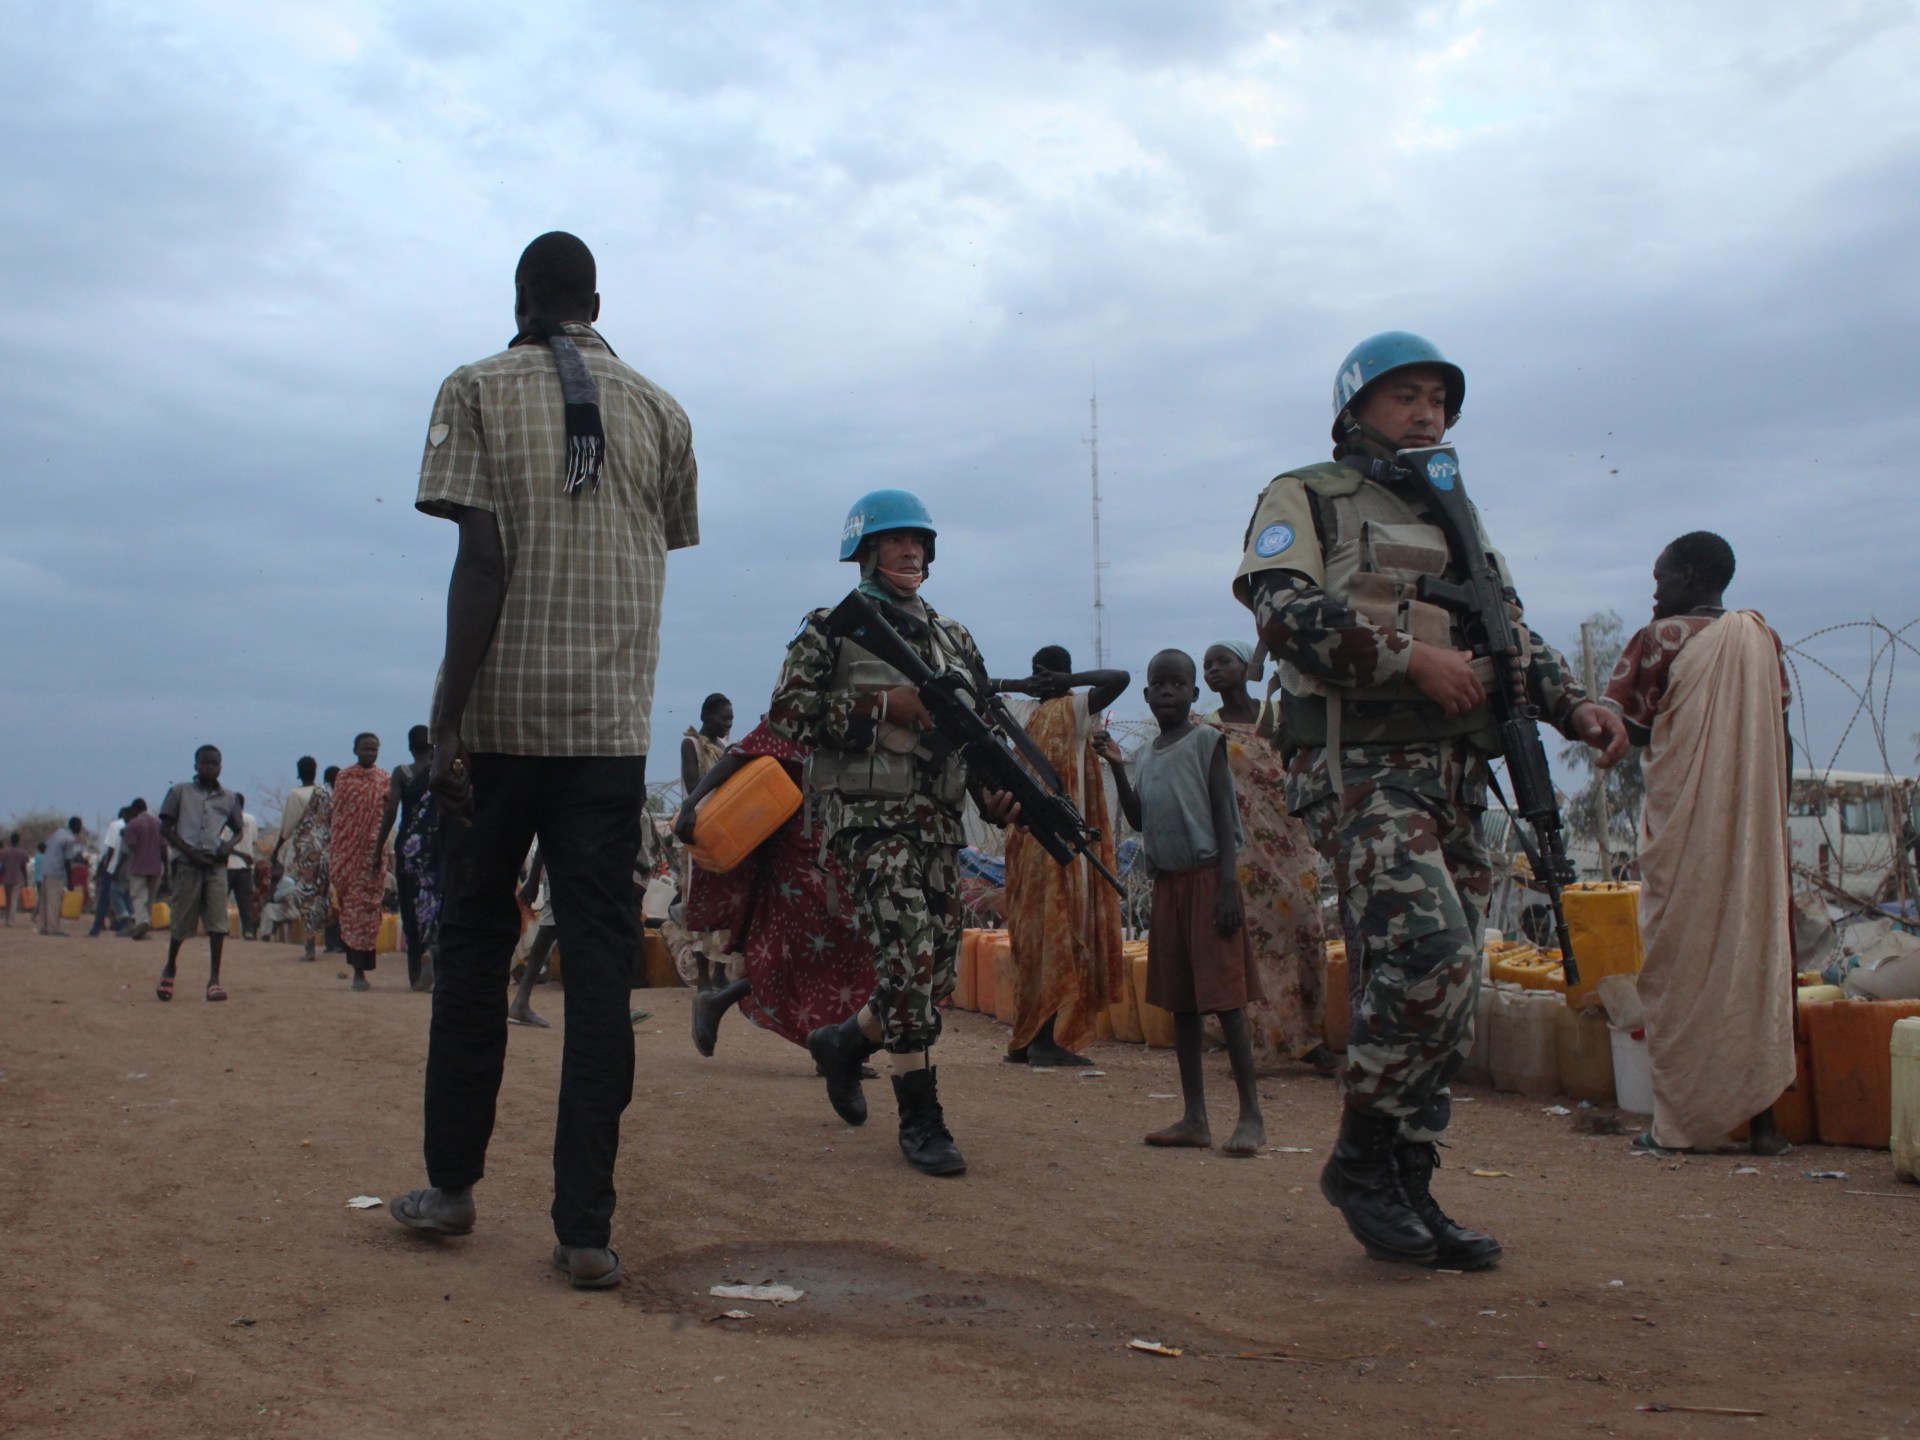 Fighting in South Sudan camp leaves 13 displaced people dead: UN